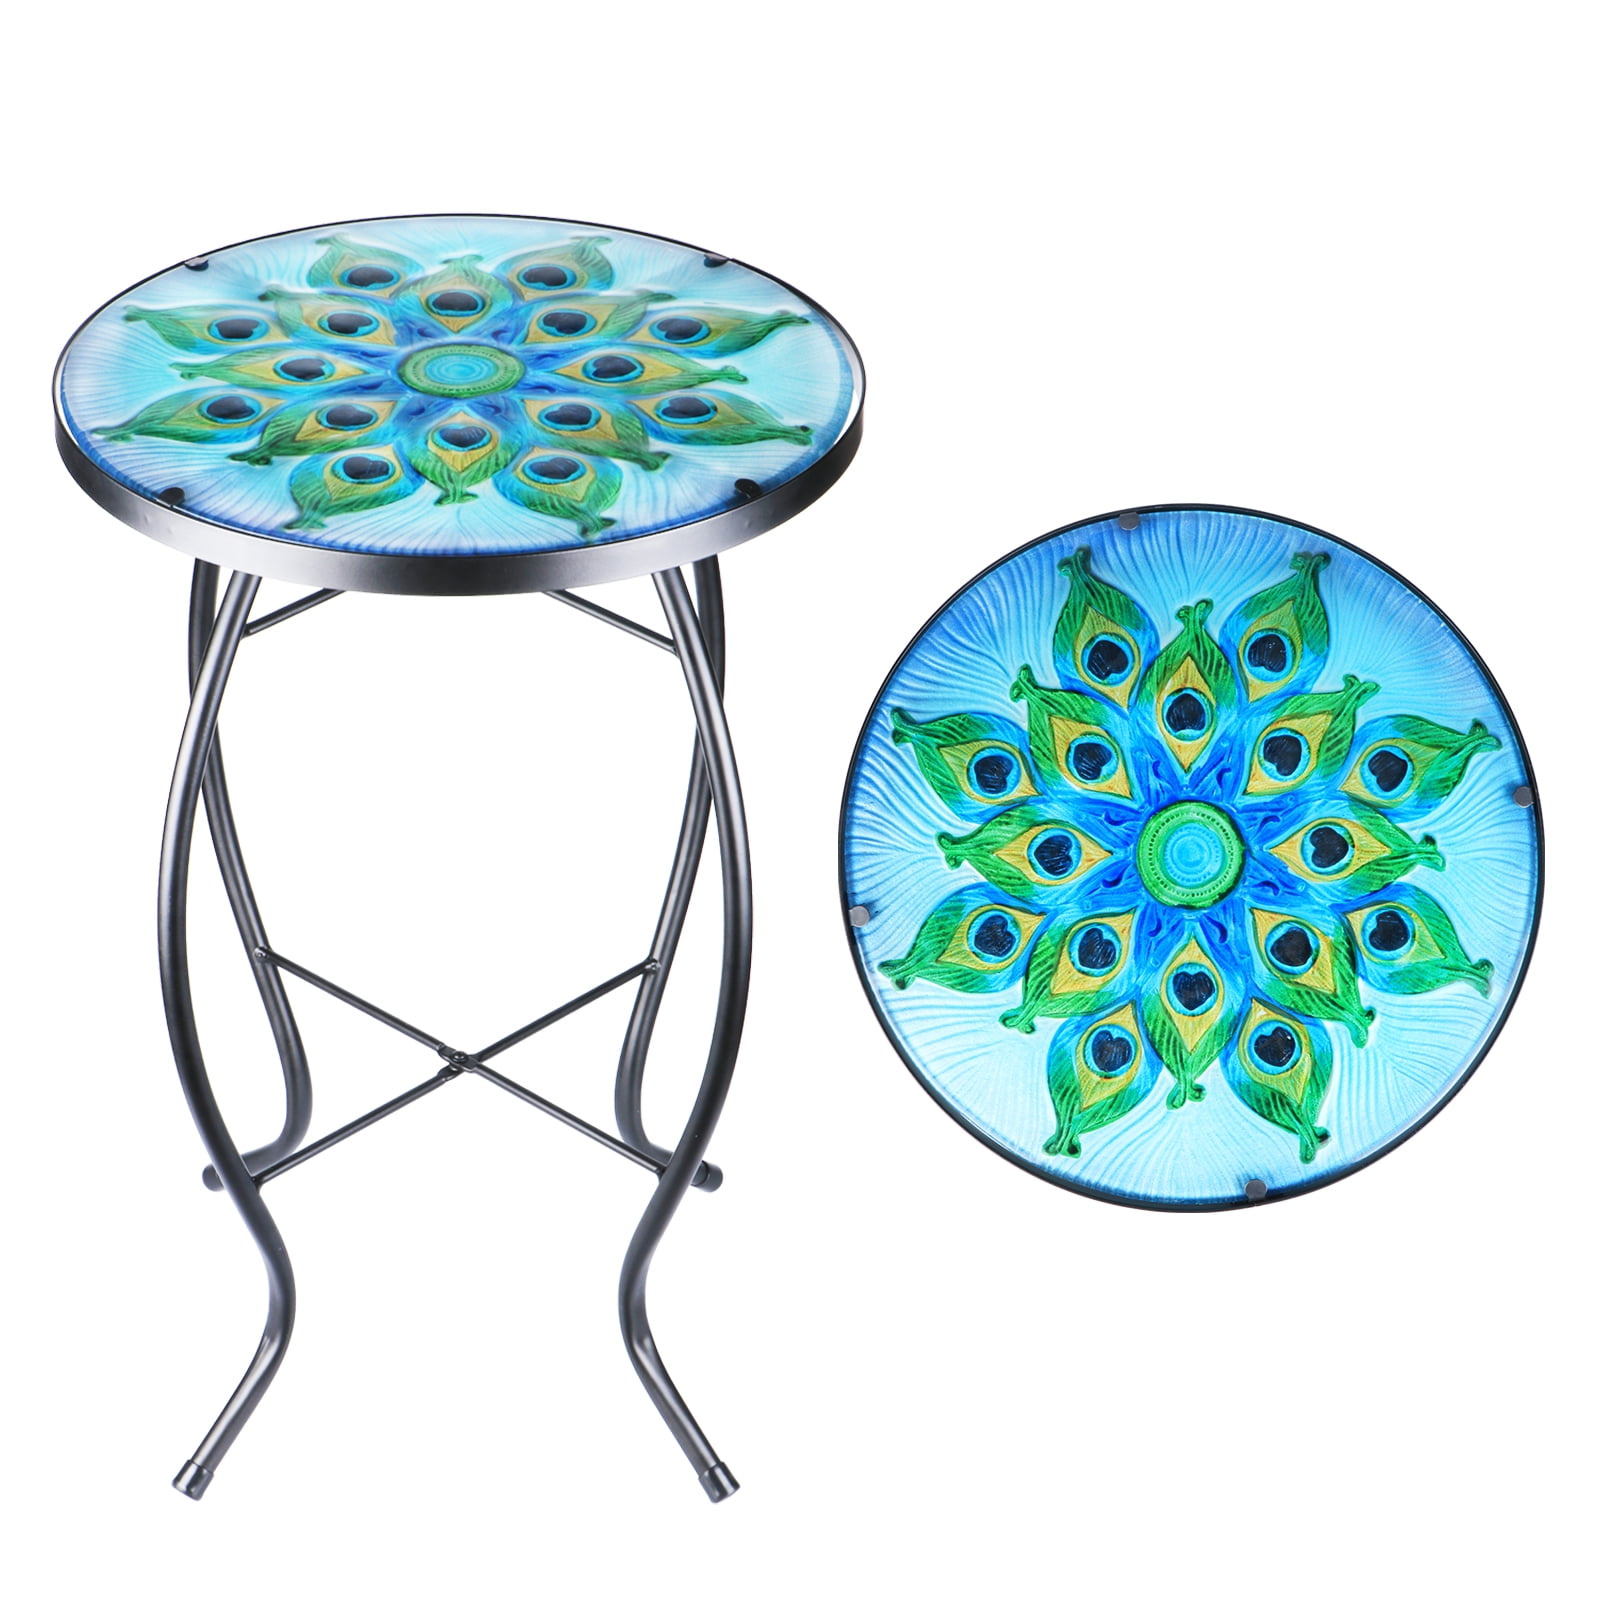 VCUTEKA Patio Side Table Mosaic Bitro Outdoor Accent Table Small End Table Glass Top Round Balcony Coffee Table Porch Indoor 